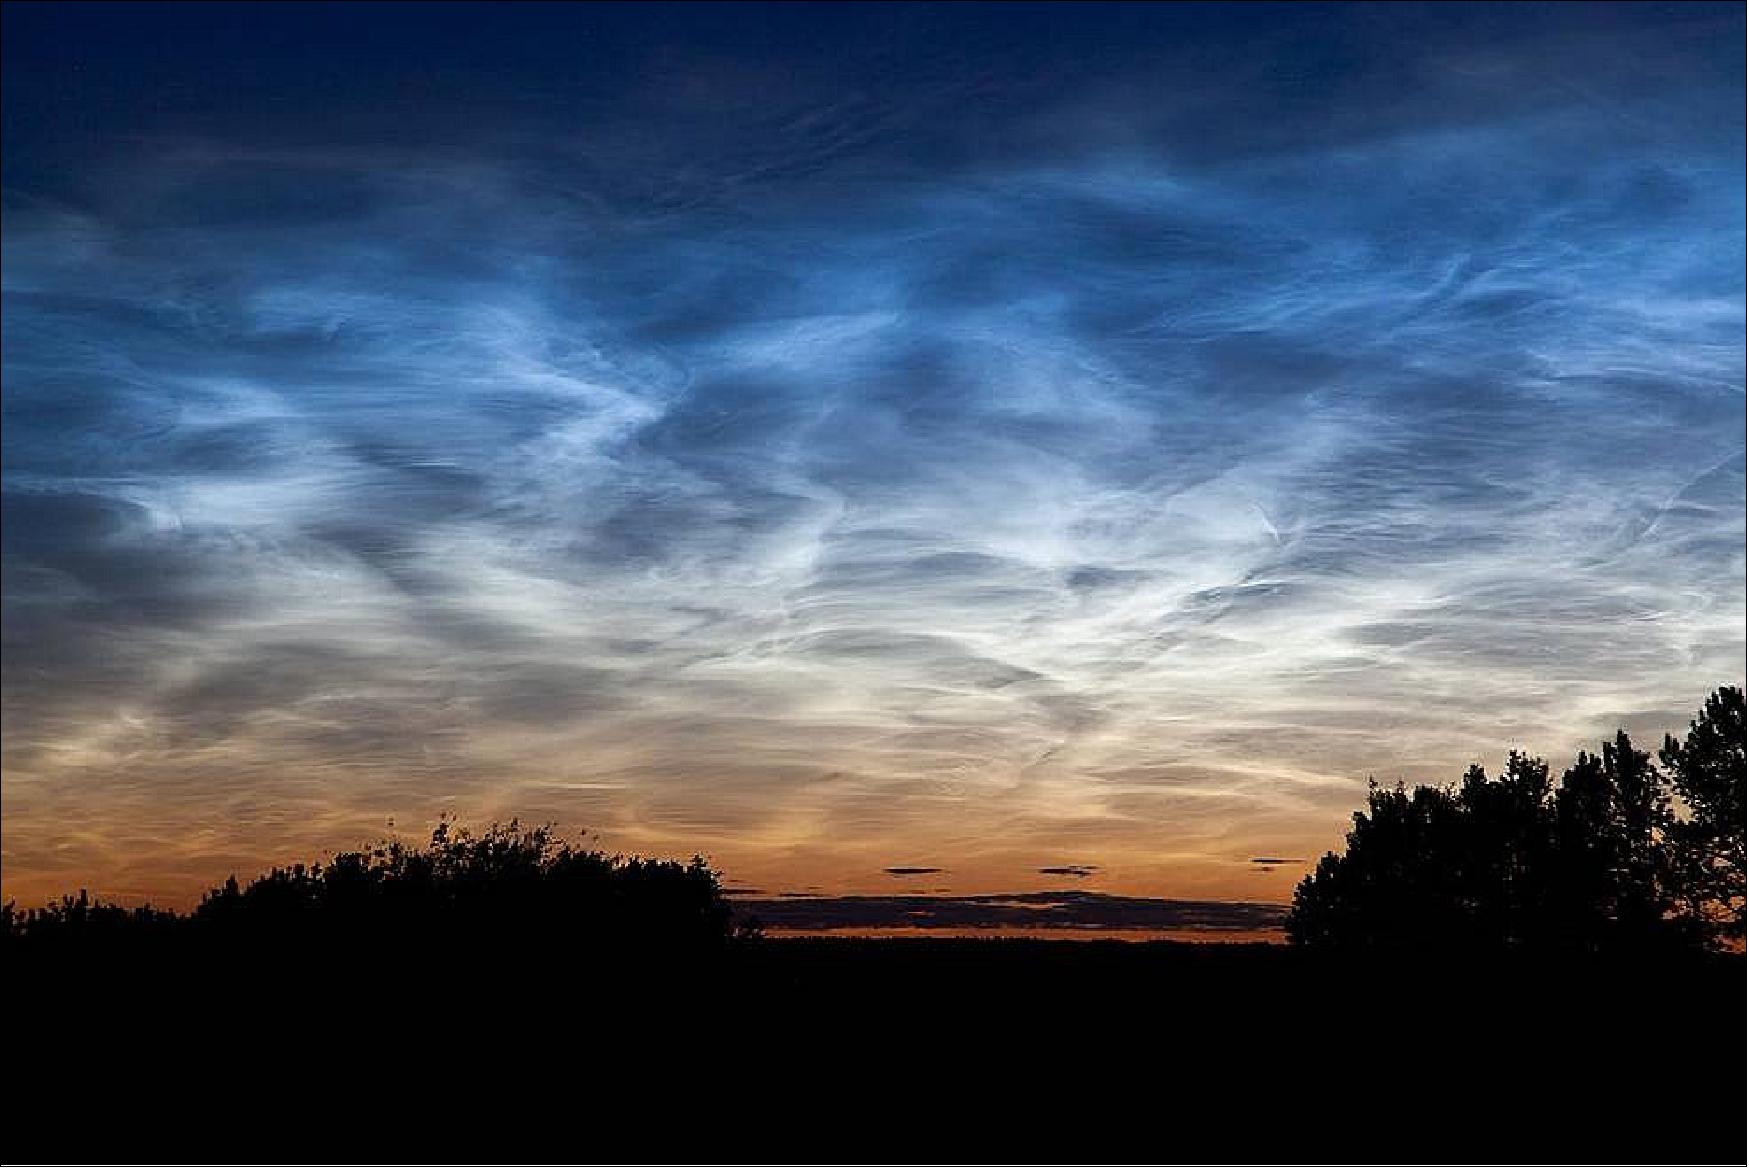 Figure 7: Noctilucent clouds appeared in the sky above Edmonton, Alberta, in Canada on July 2, 2011 (image credits: NASA/Dave Hughes)